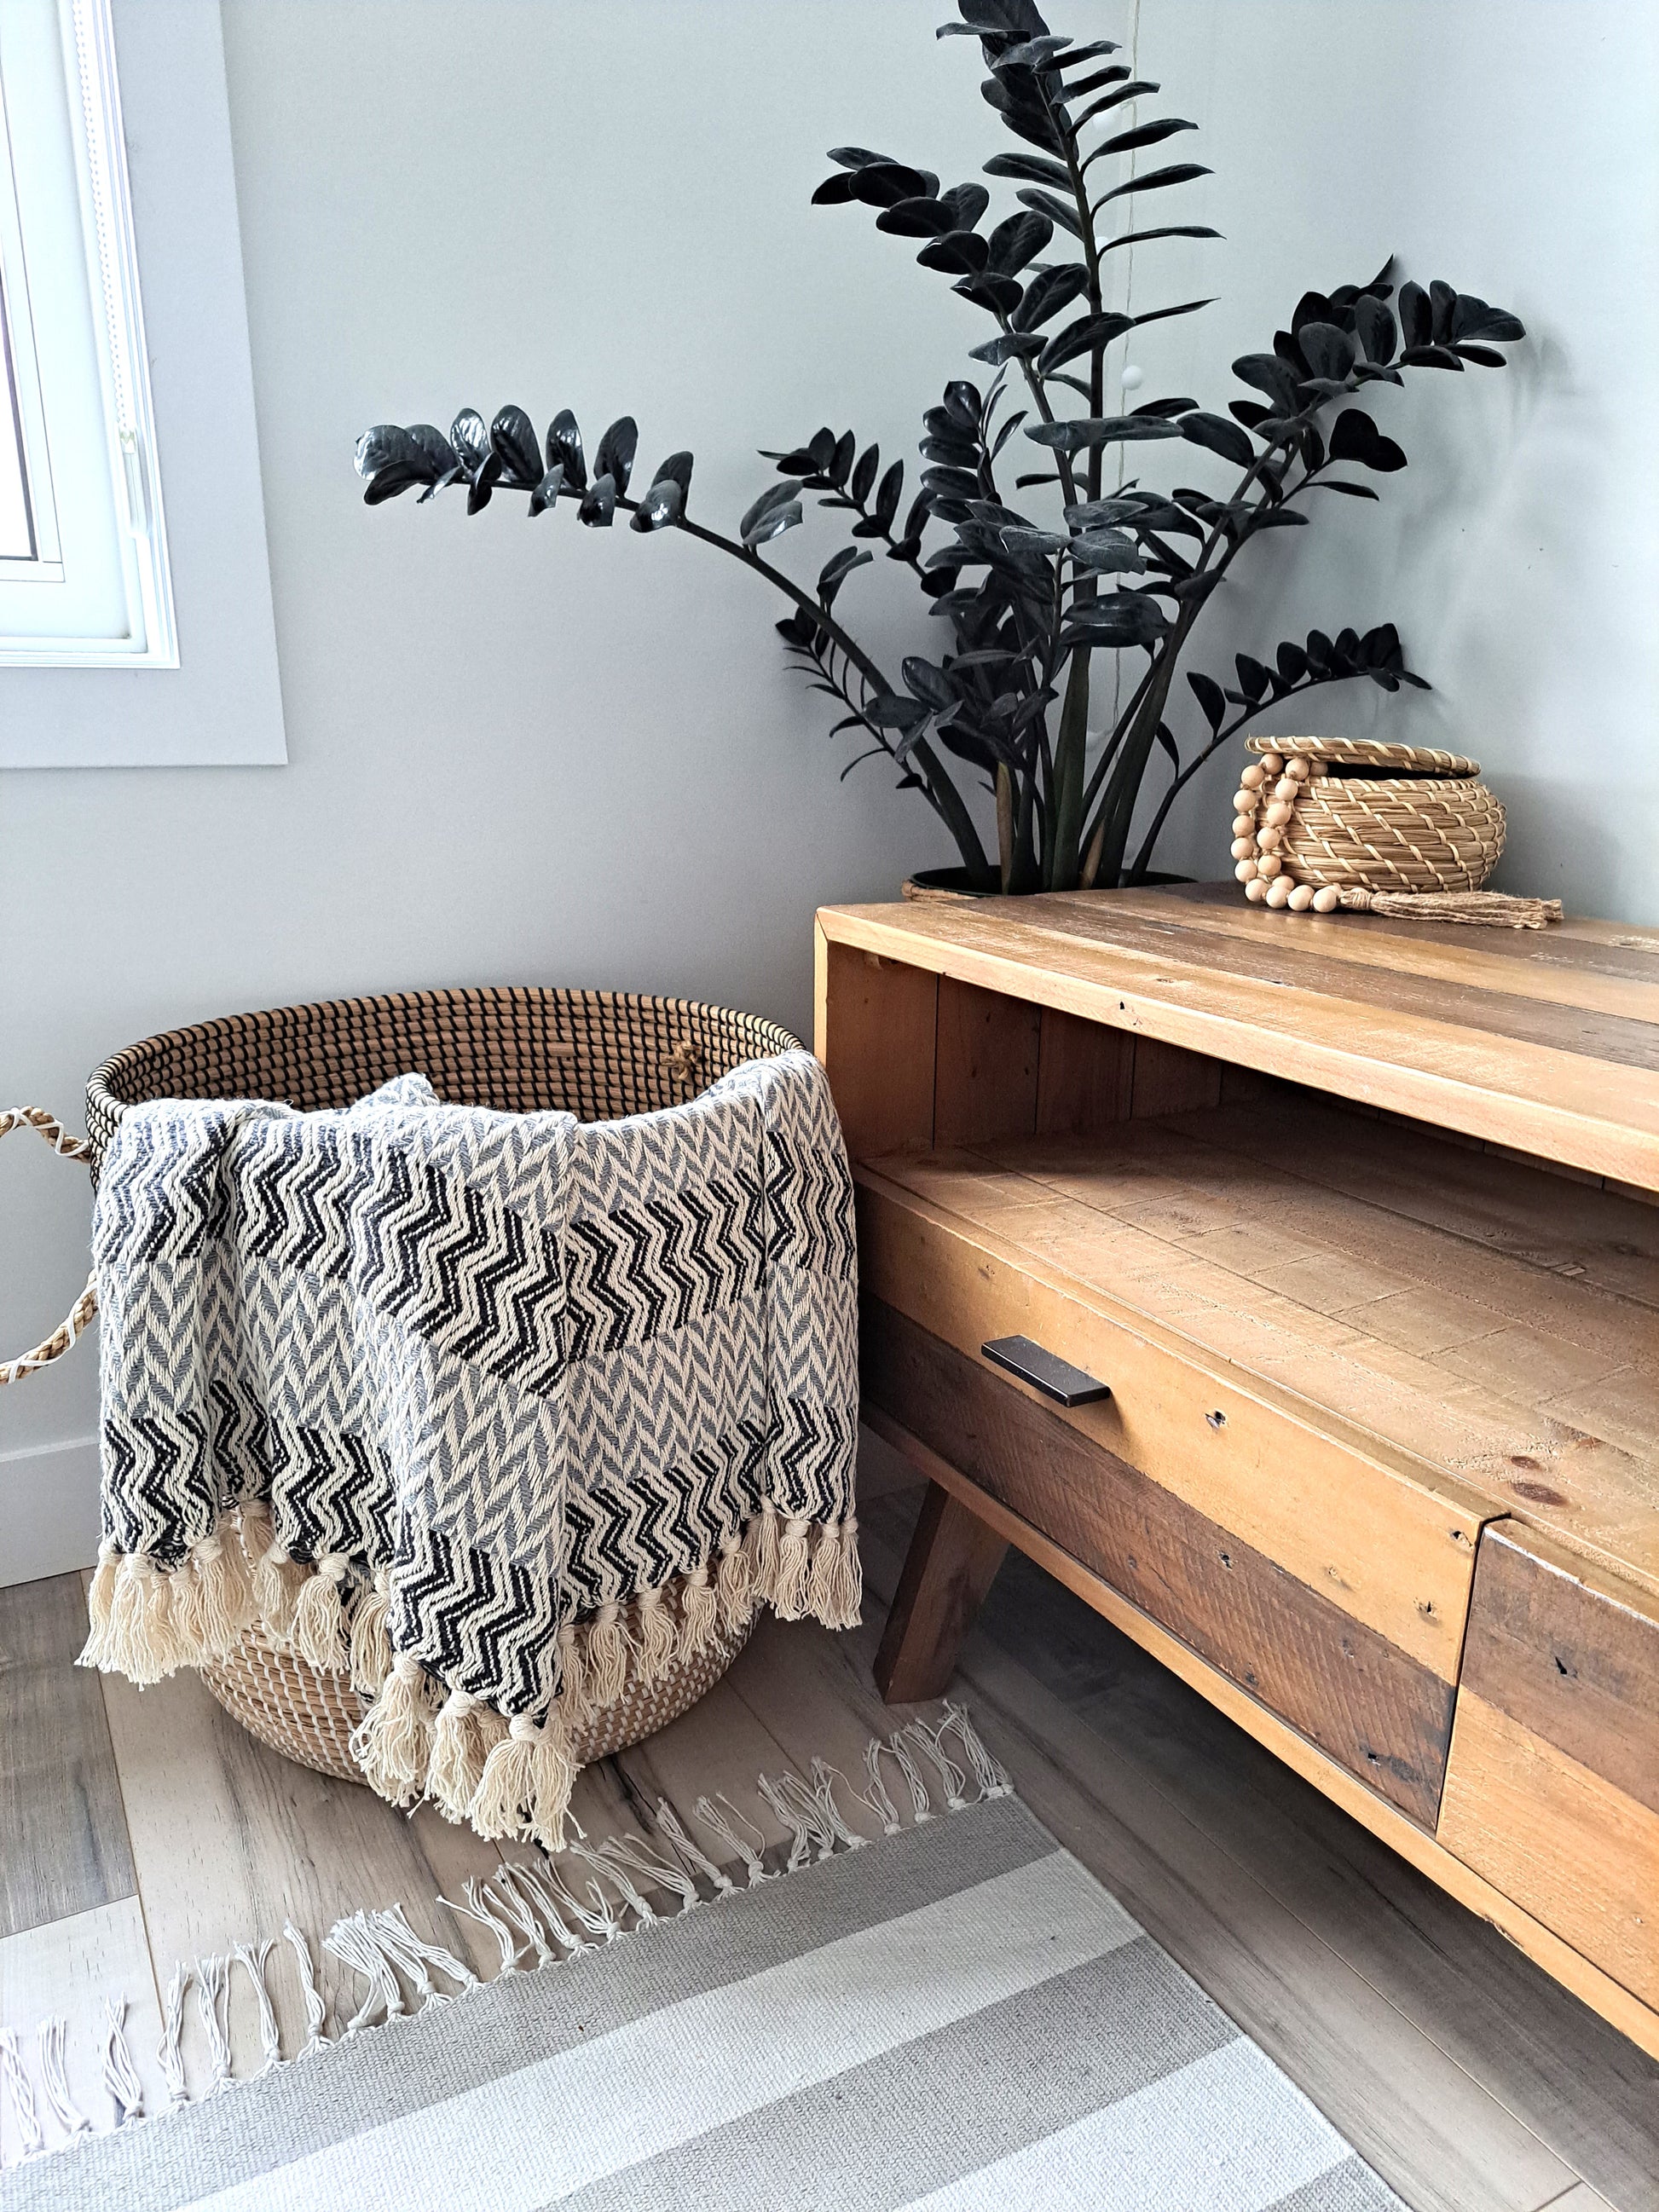 An incredibly soft and warm throw, this handwoven 100% cotton blanket adds so much texture to the space. Made with a chevron pattern, the neutral beige, grey, and subtle blue provide lots of visual interest by providing a bold, yet calming overall look. Truly an artisanal piece, and one that is sure to impress!